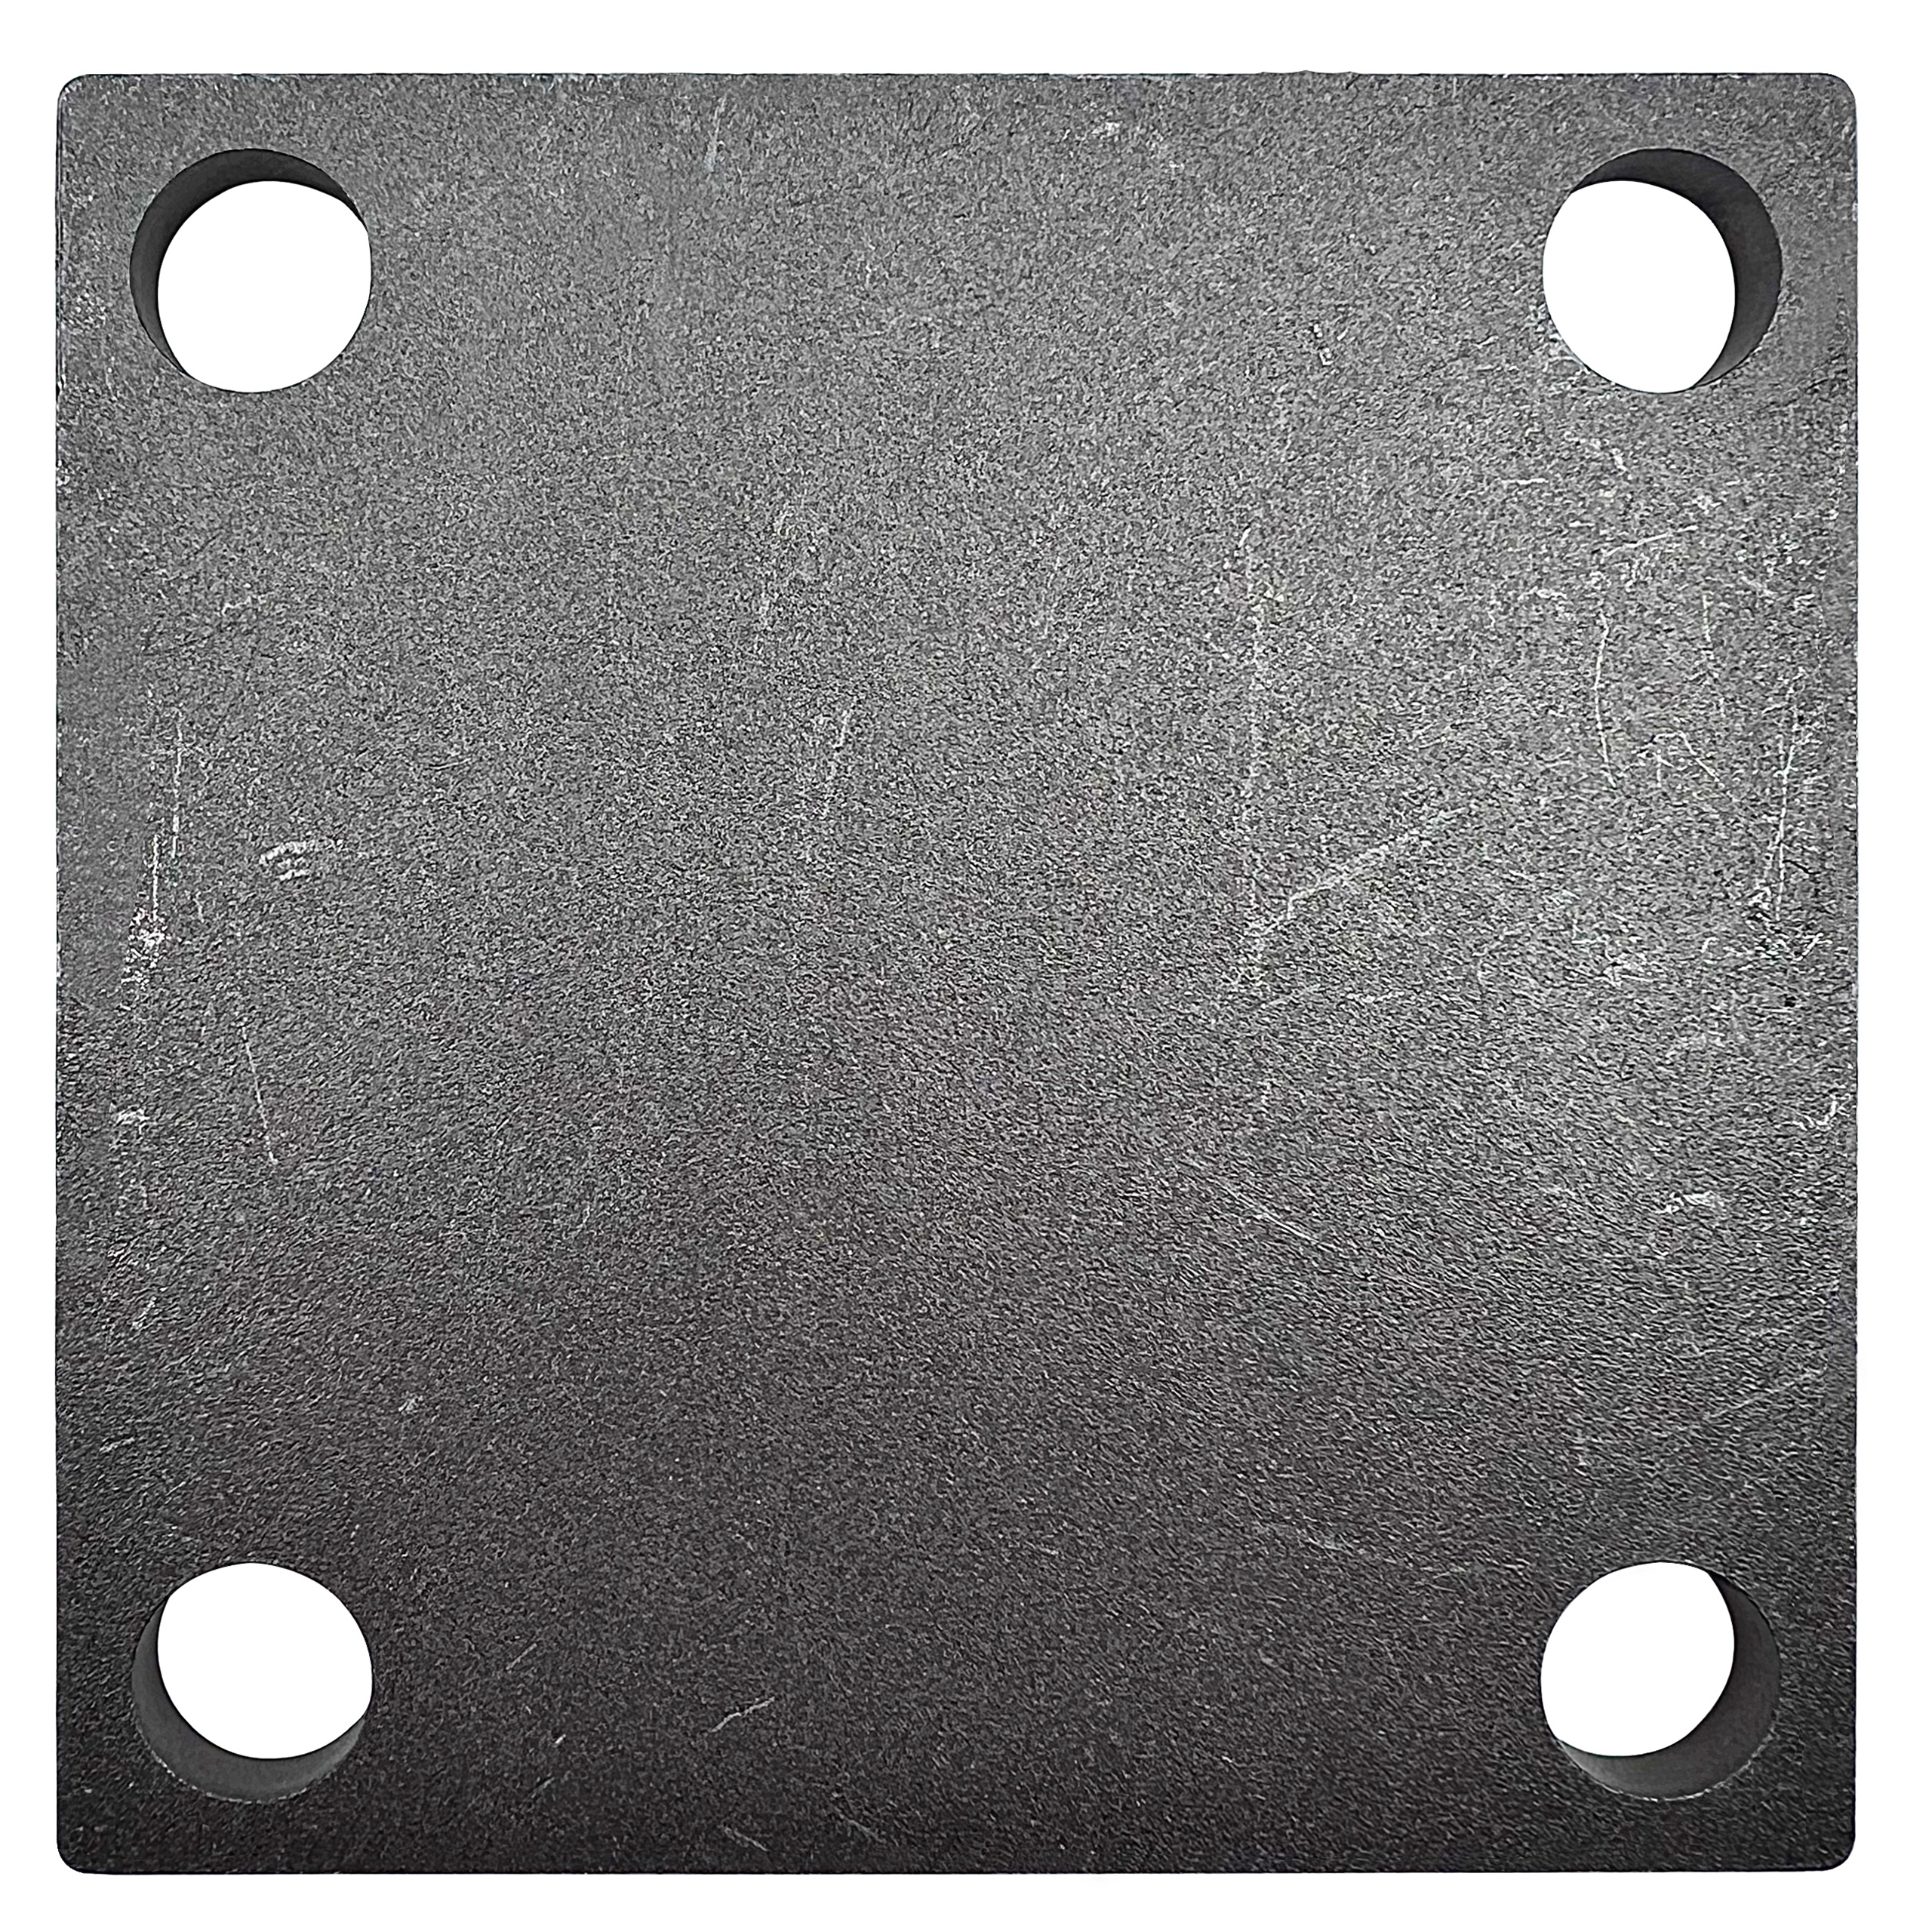 4x4" Square Steel Metal Baseplate 1/4" Thick 6mm - Laser Cut – A36 Heavy Duty Carbon Steel